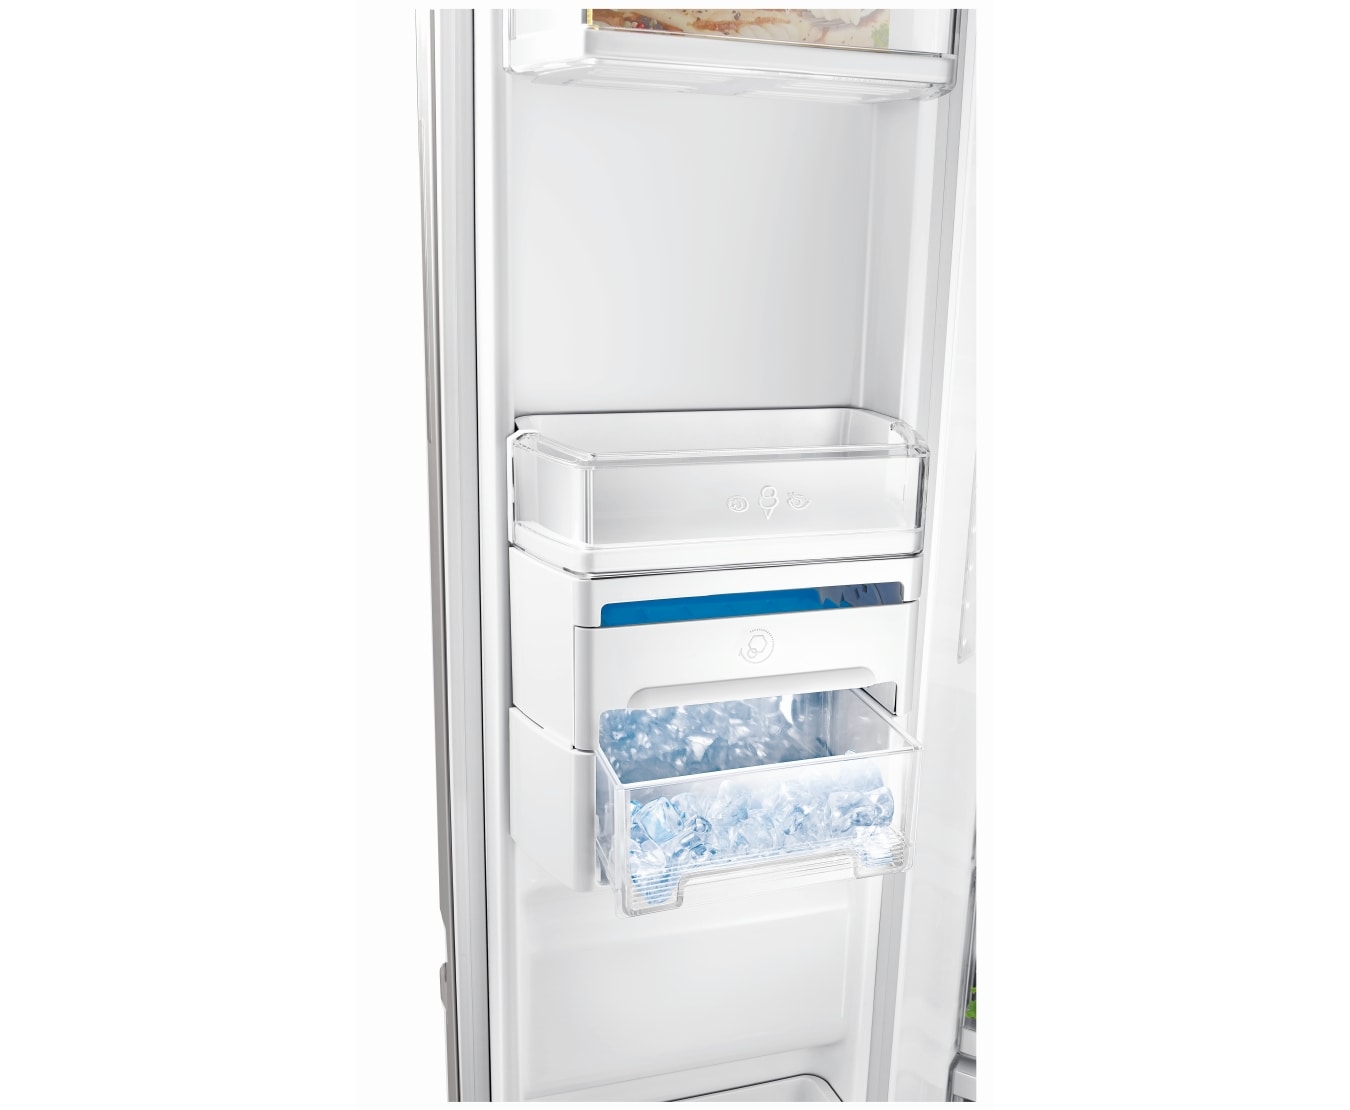 GS-B679PL - 679L Side by Side refrigerator with 3 Star Energy Rating